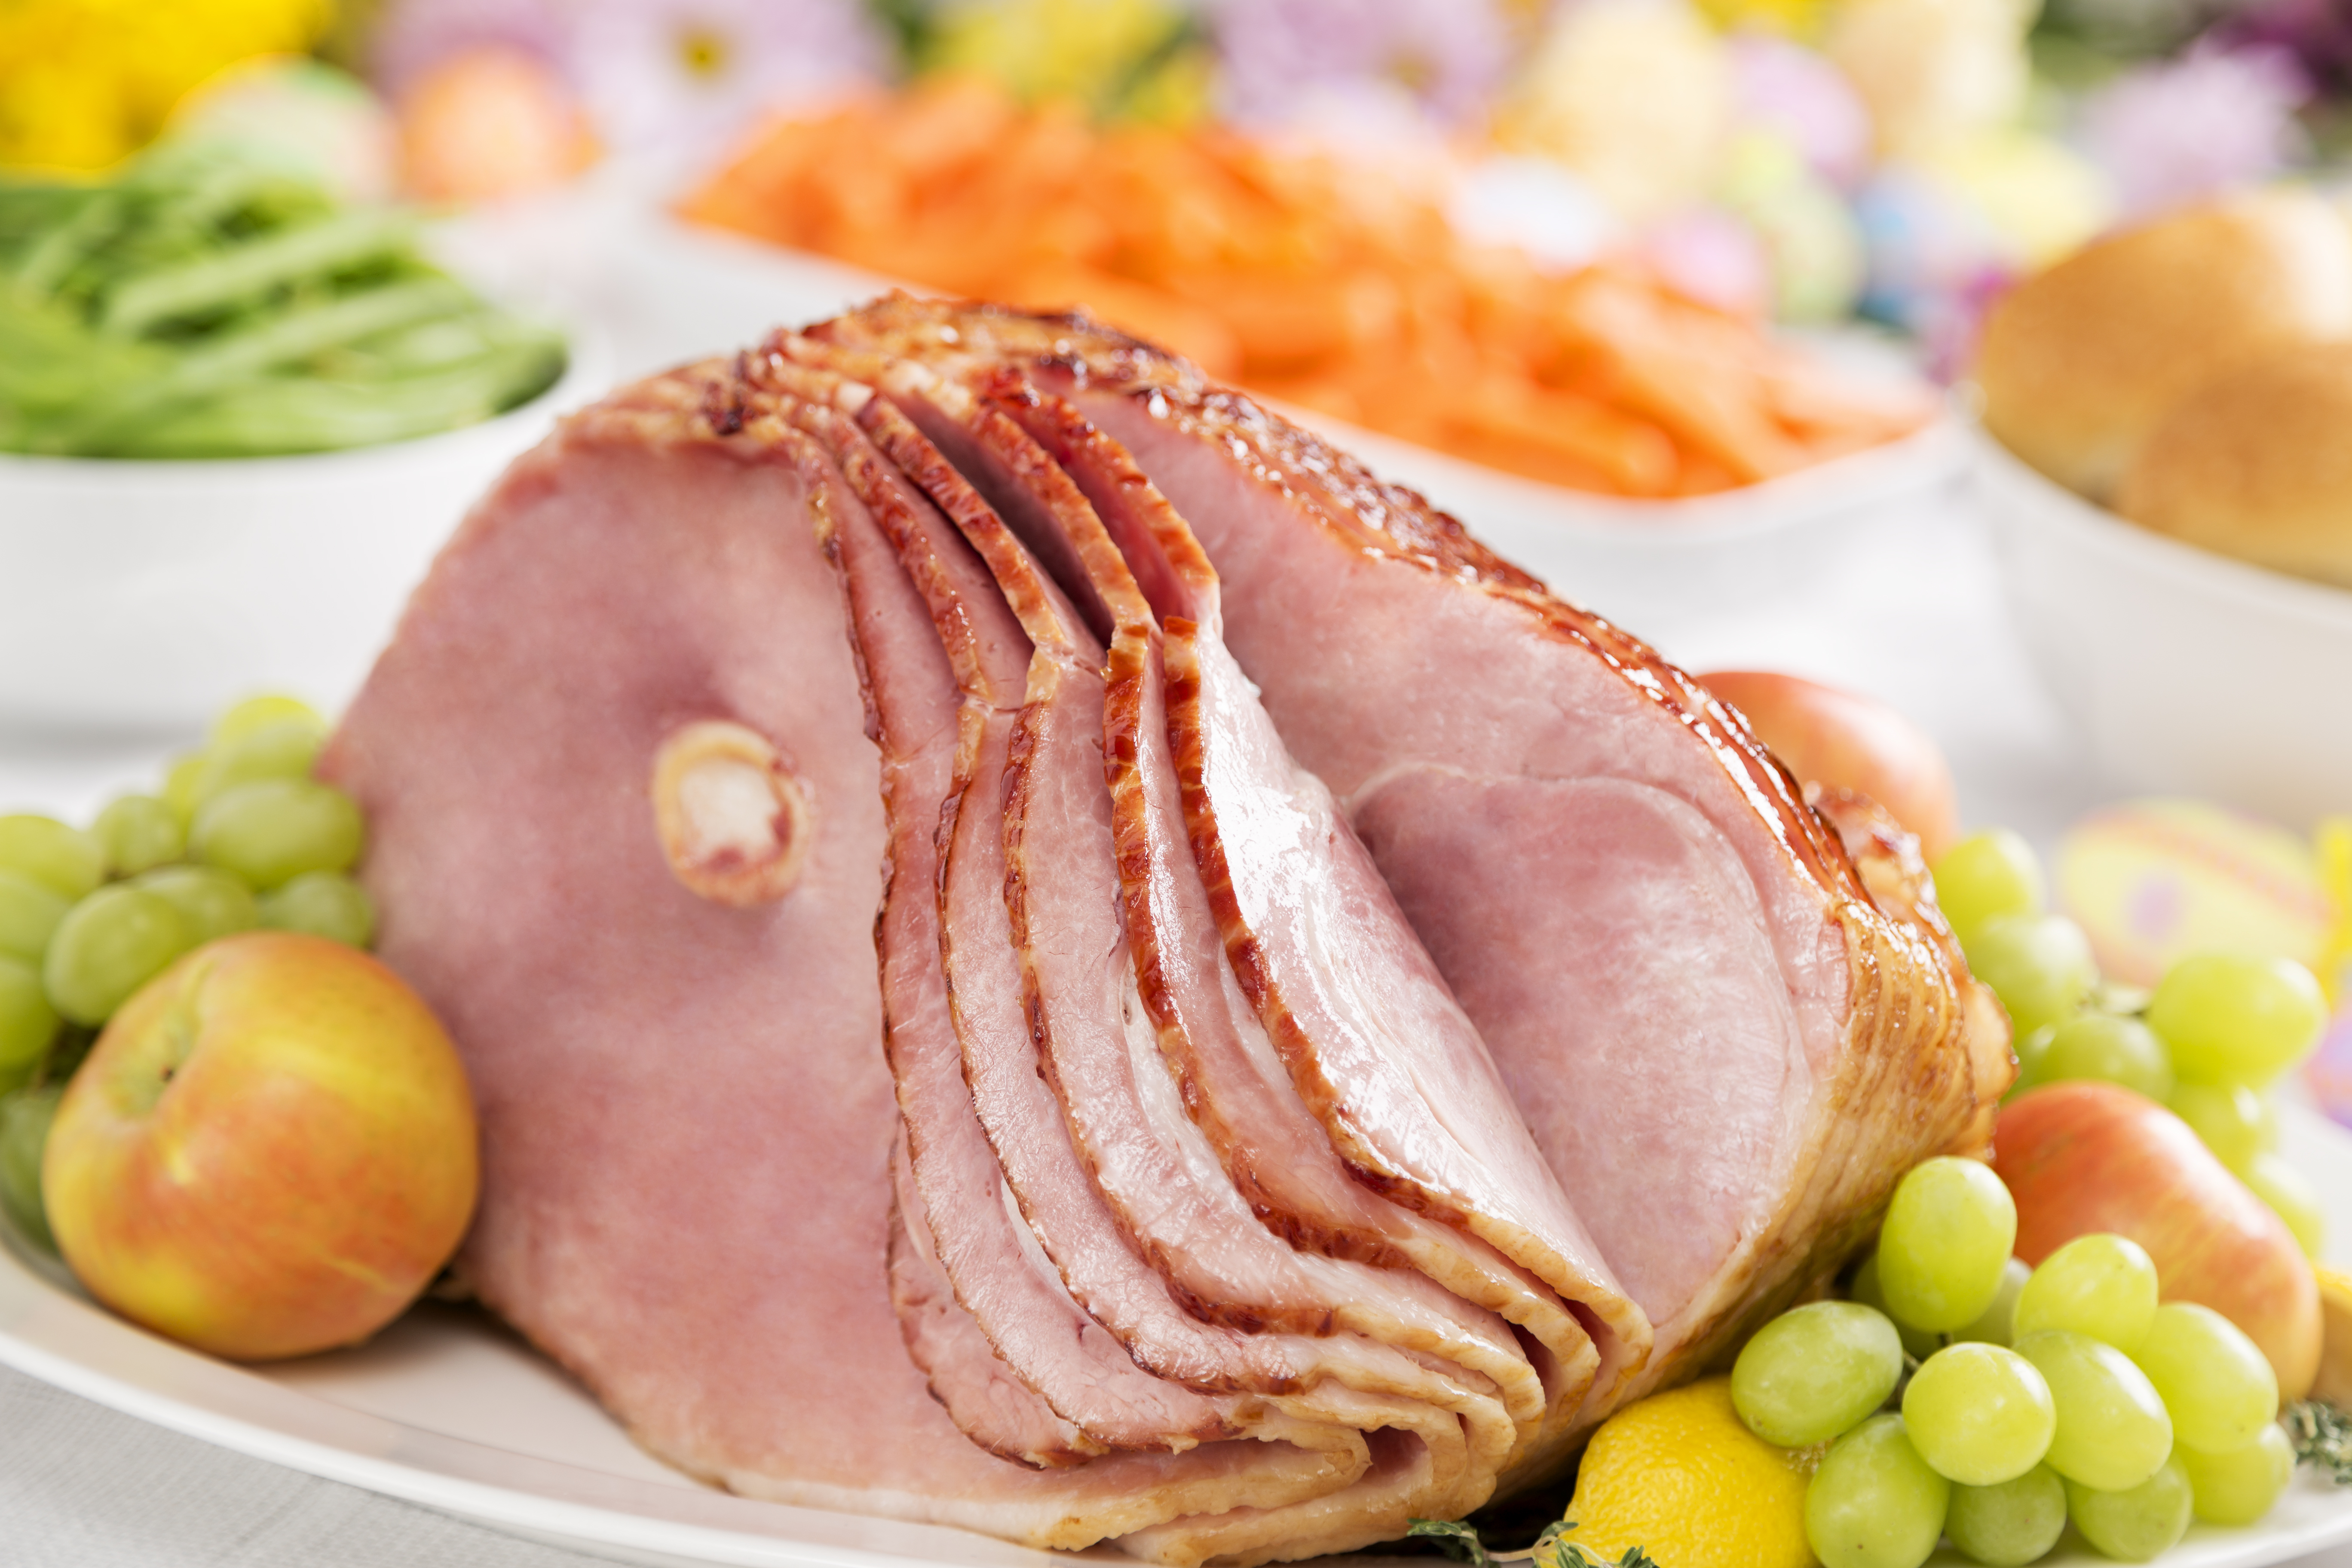 sliced bone-in ham on white plate with apples and grapes on it and blurred veggies in white bowls in background